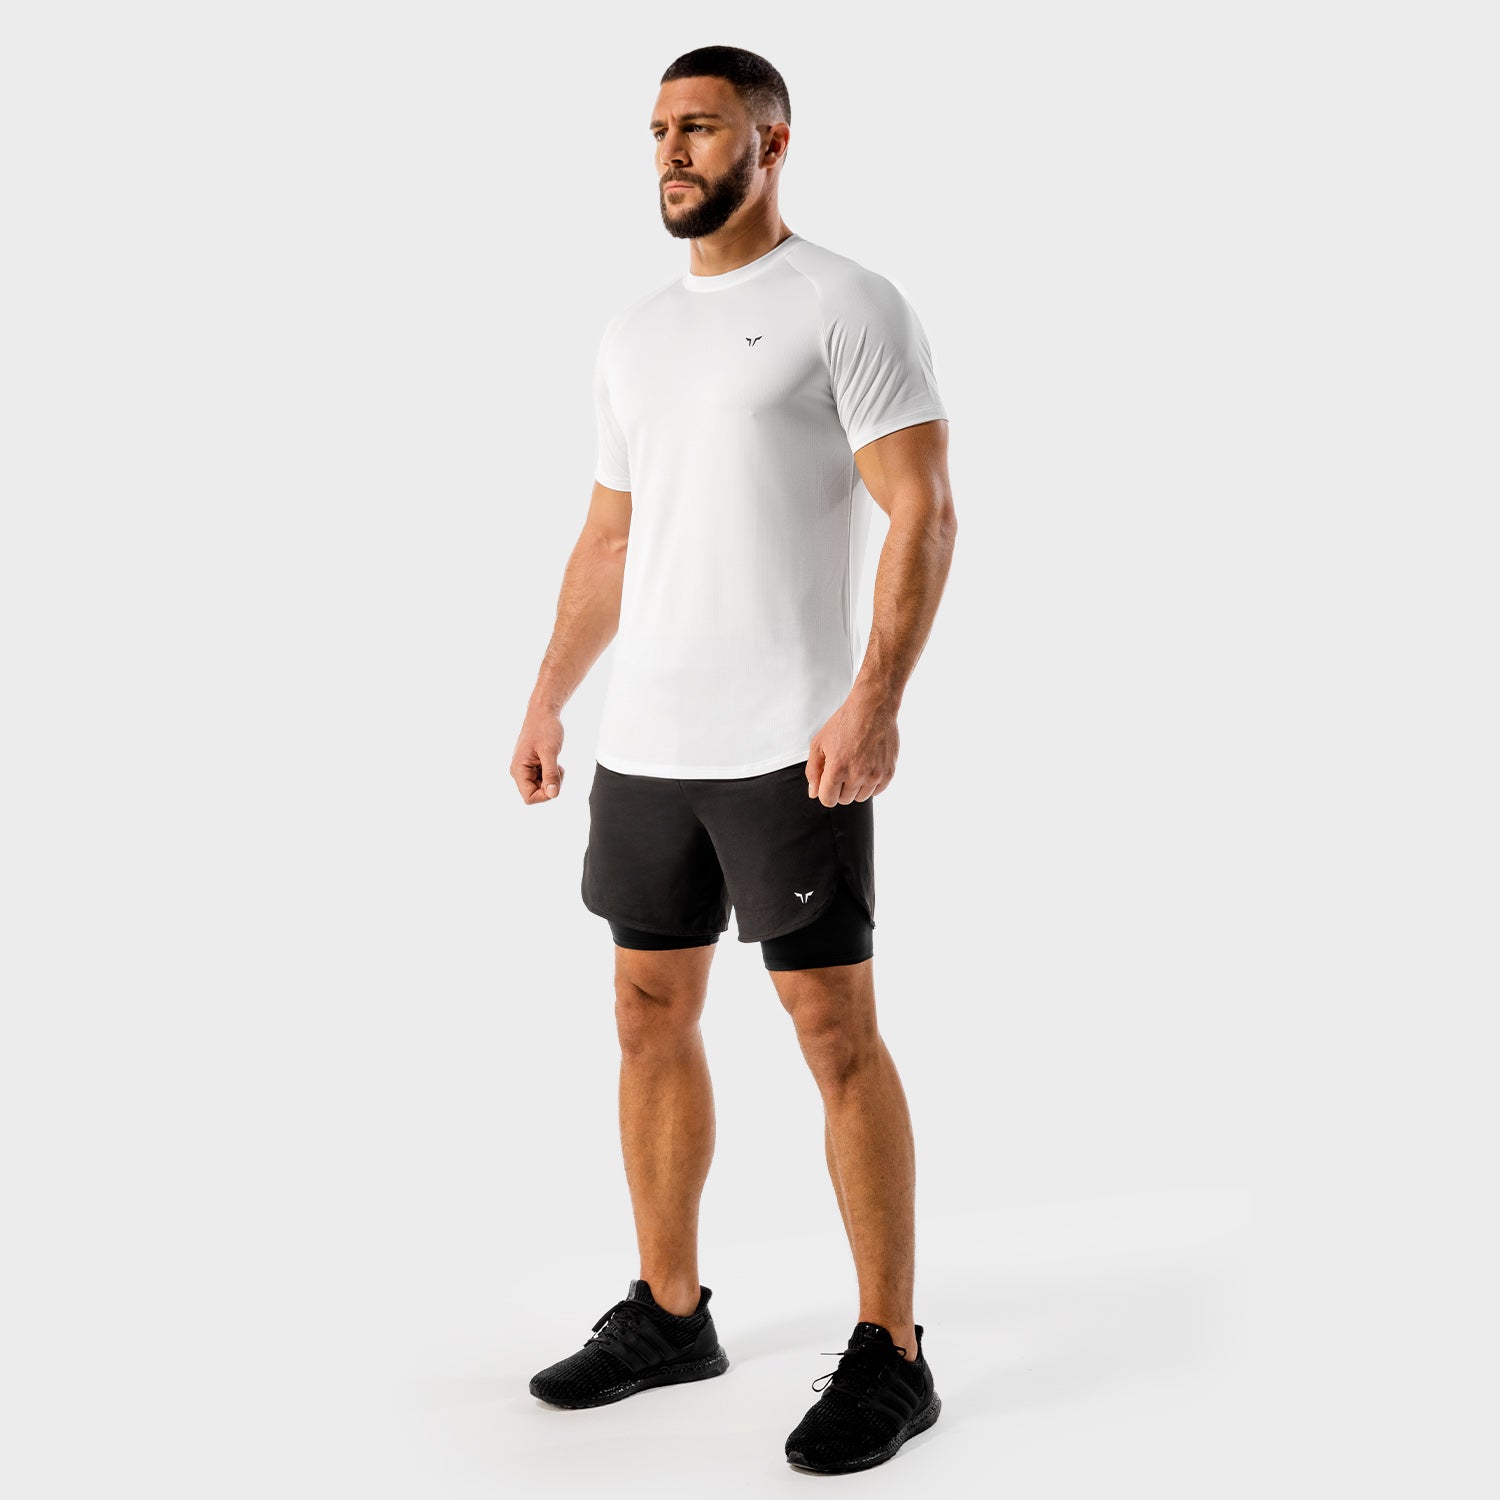 squatwolf-gym-wear-core-mesh-tee-white-workout-shirts-for-men